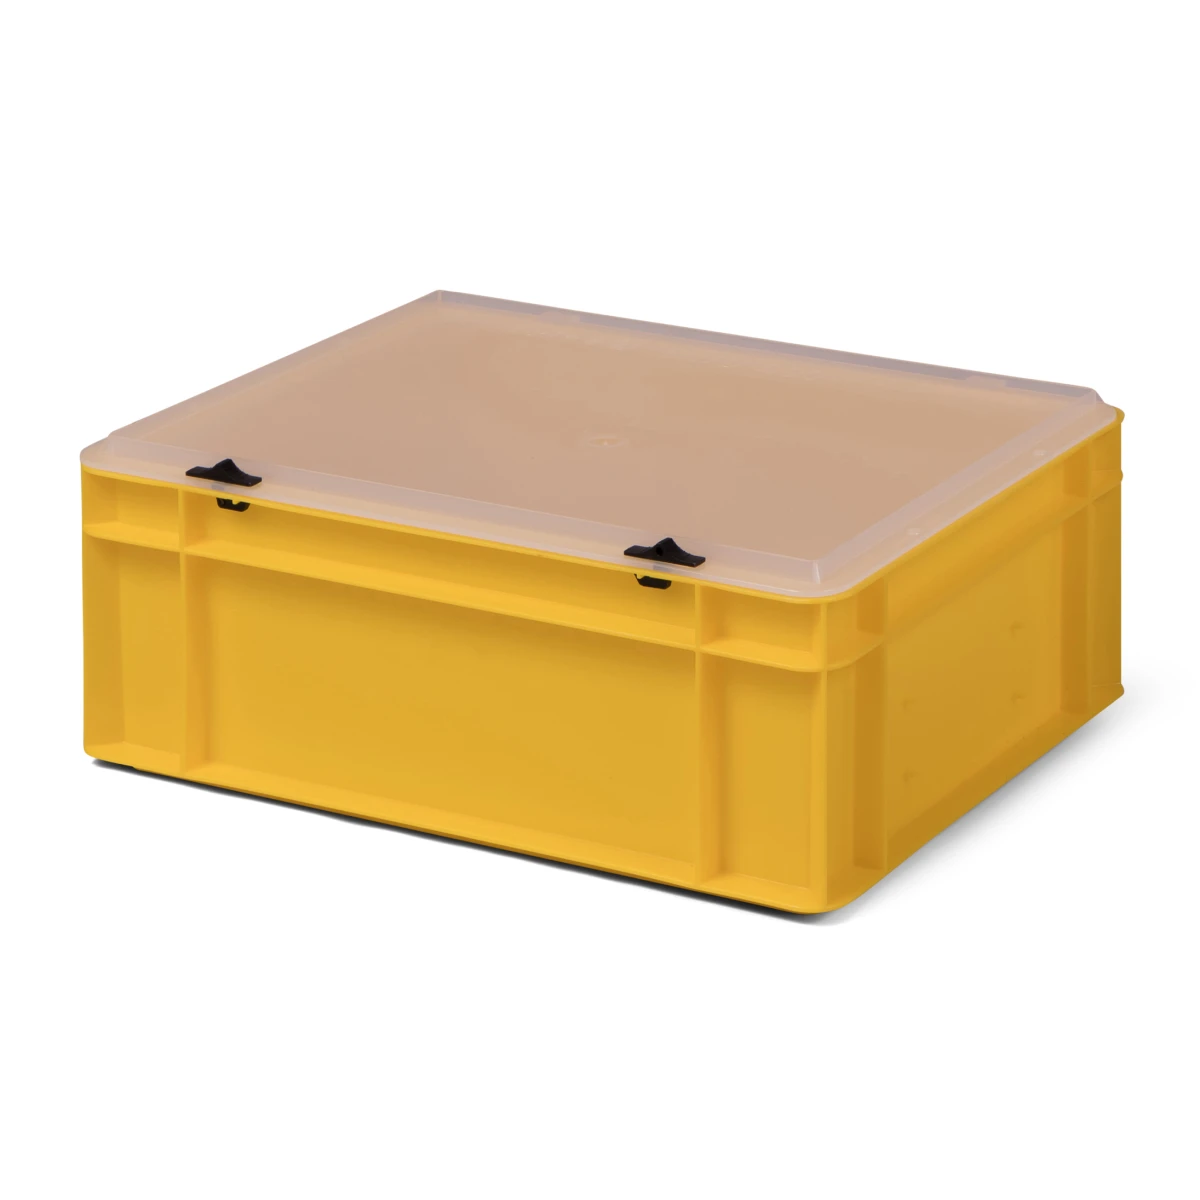 Euro transport stacker box K-TK 400/145-t, 400x300x145/156 mm (LxWxH), with lid, (various colours), 13 liters, made of PP